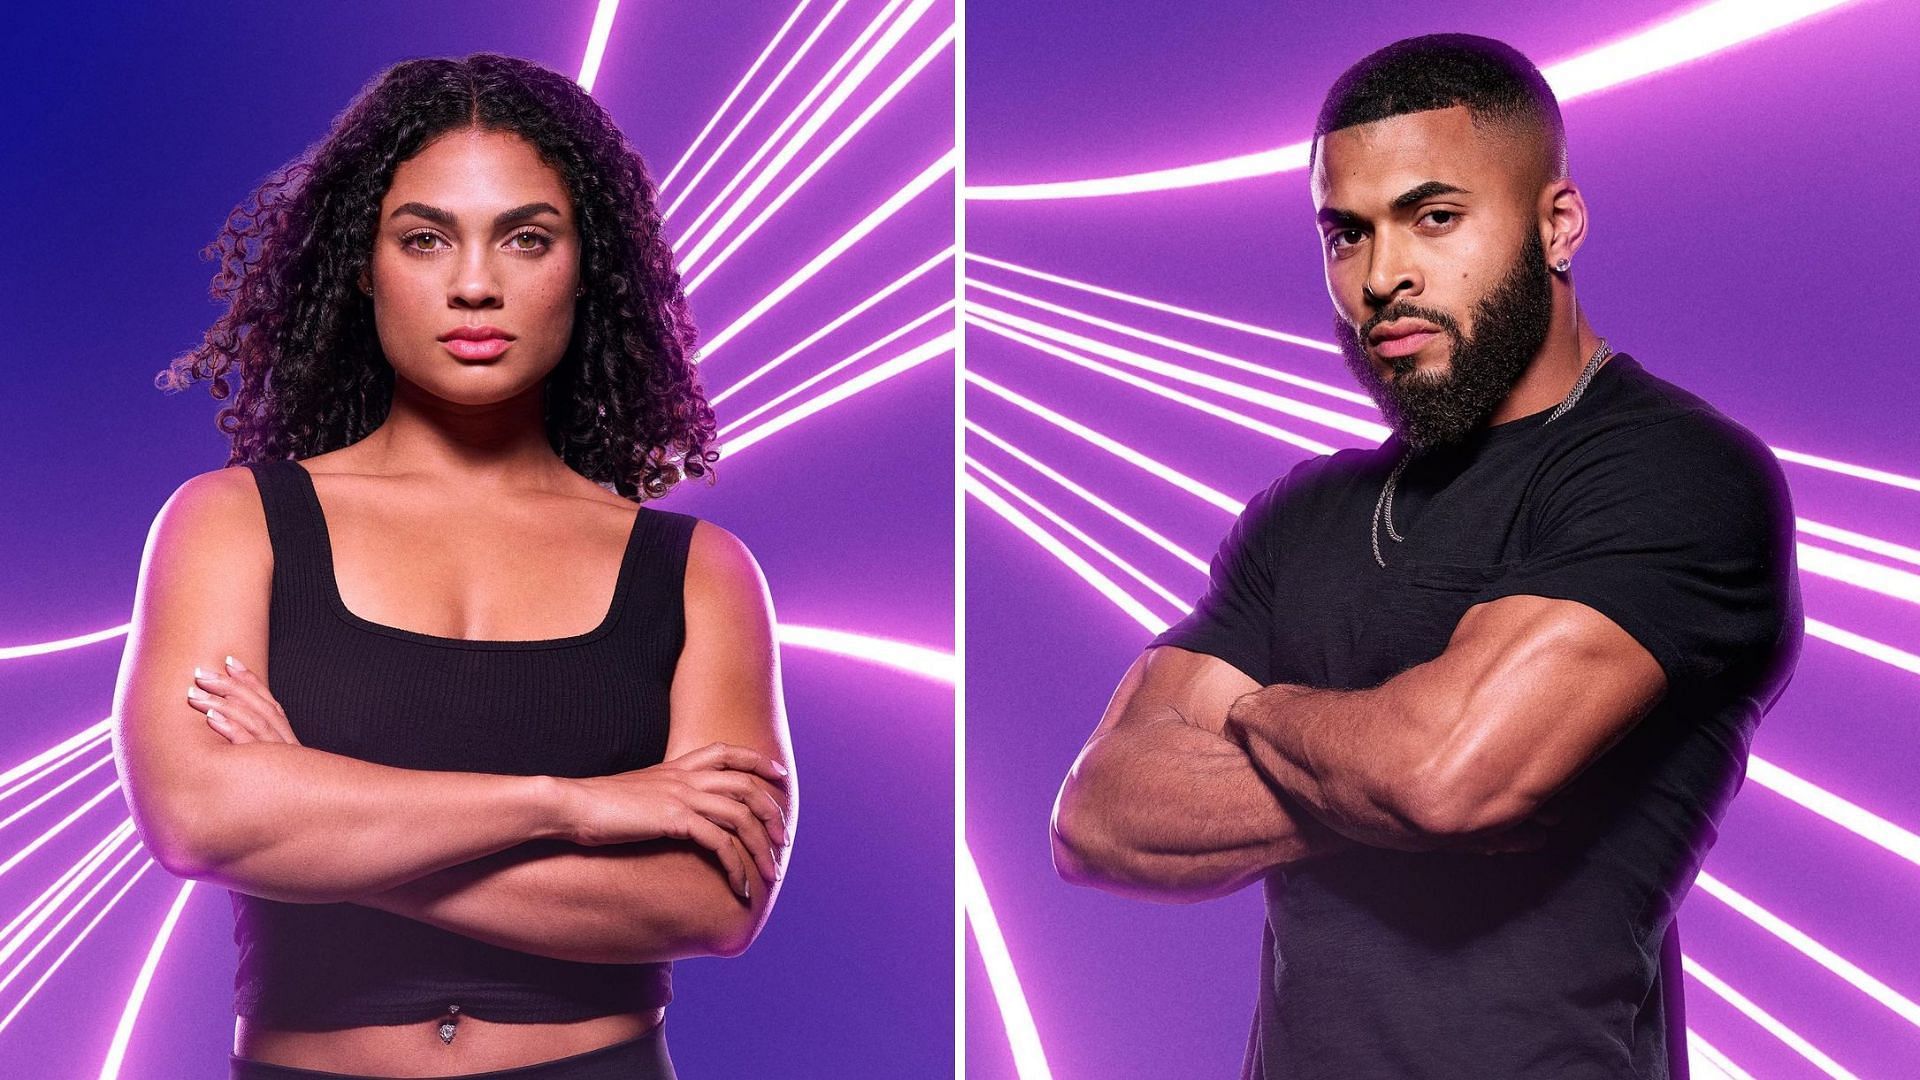 Who are Johnny Middlebrooks and Ravyn Rochelle? The Challenge